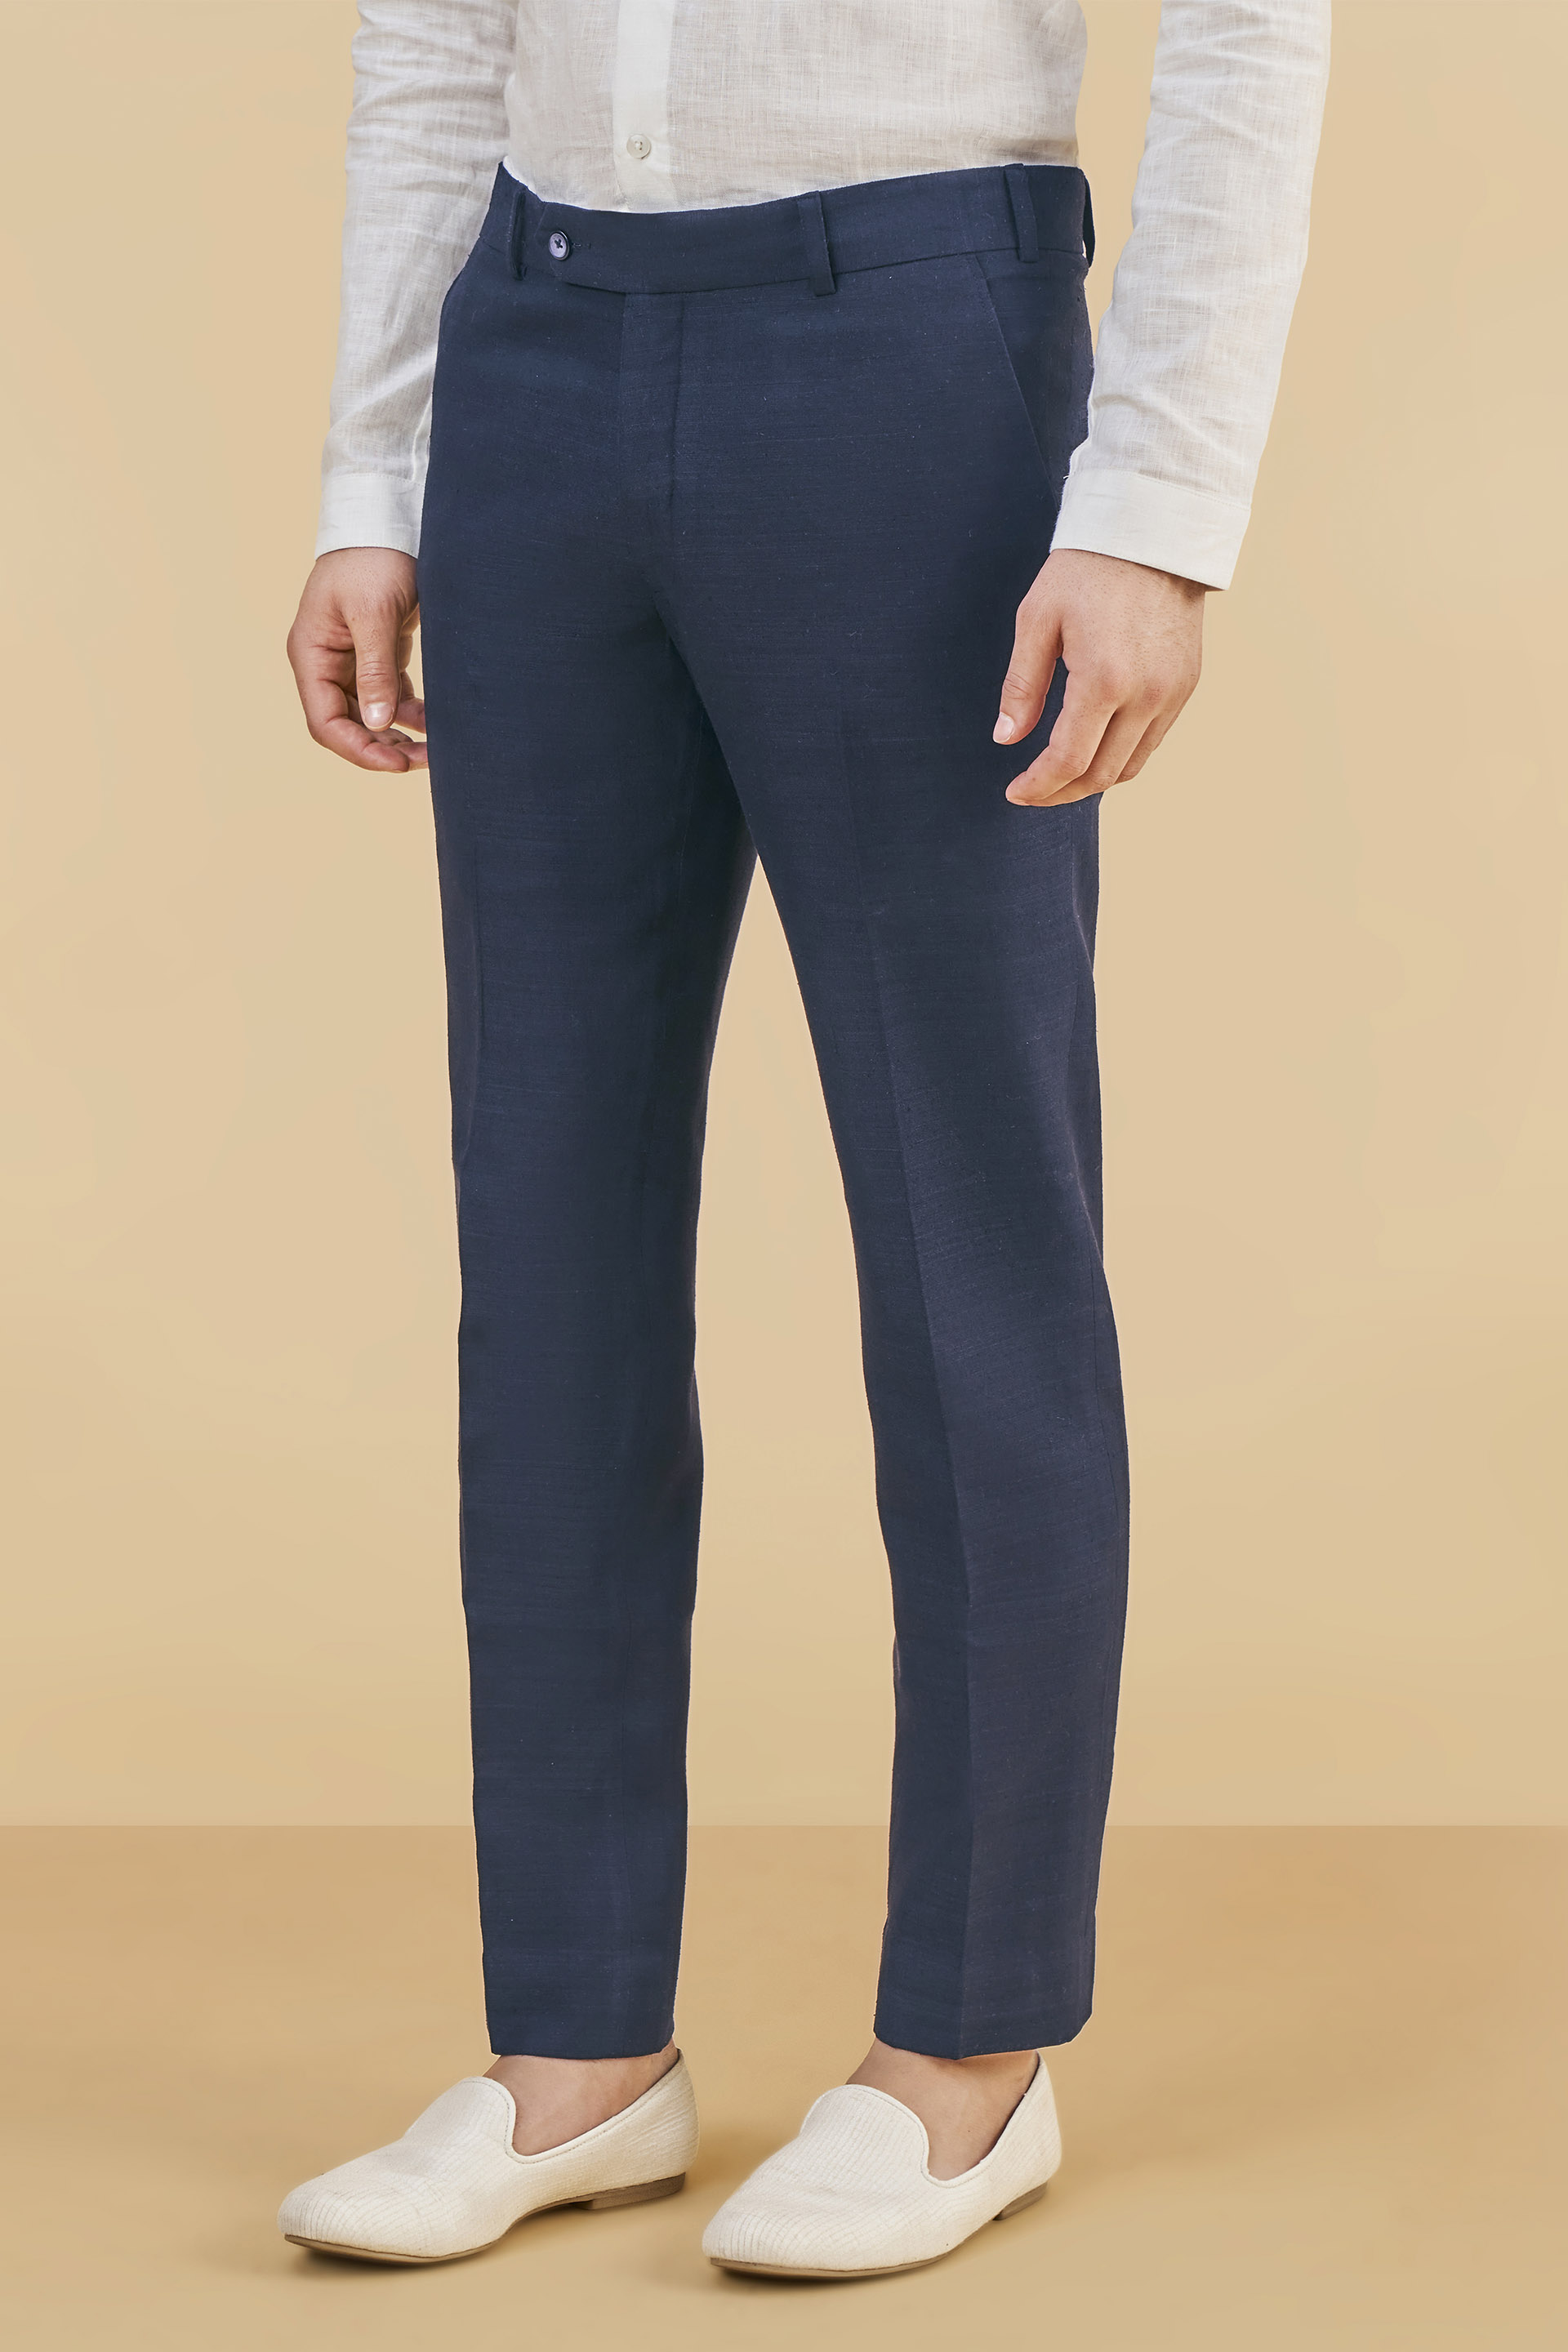 Palazzo Trousers with Side Slits in Light Blue Silk Charmeuse with Gin –  STEF MOUCHIE